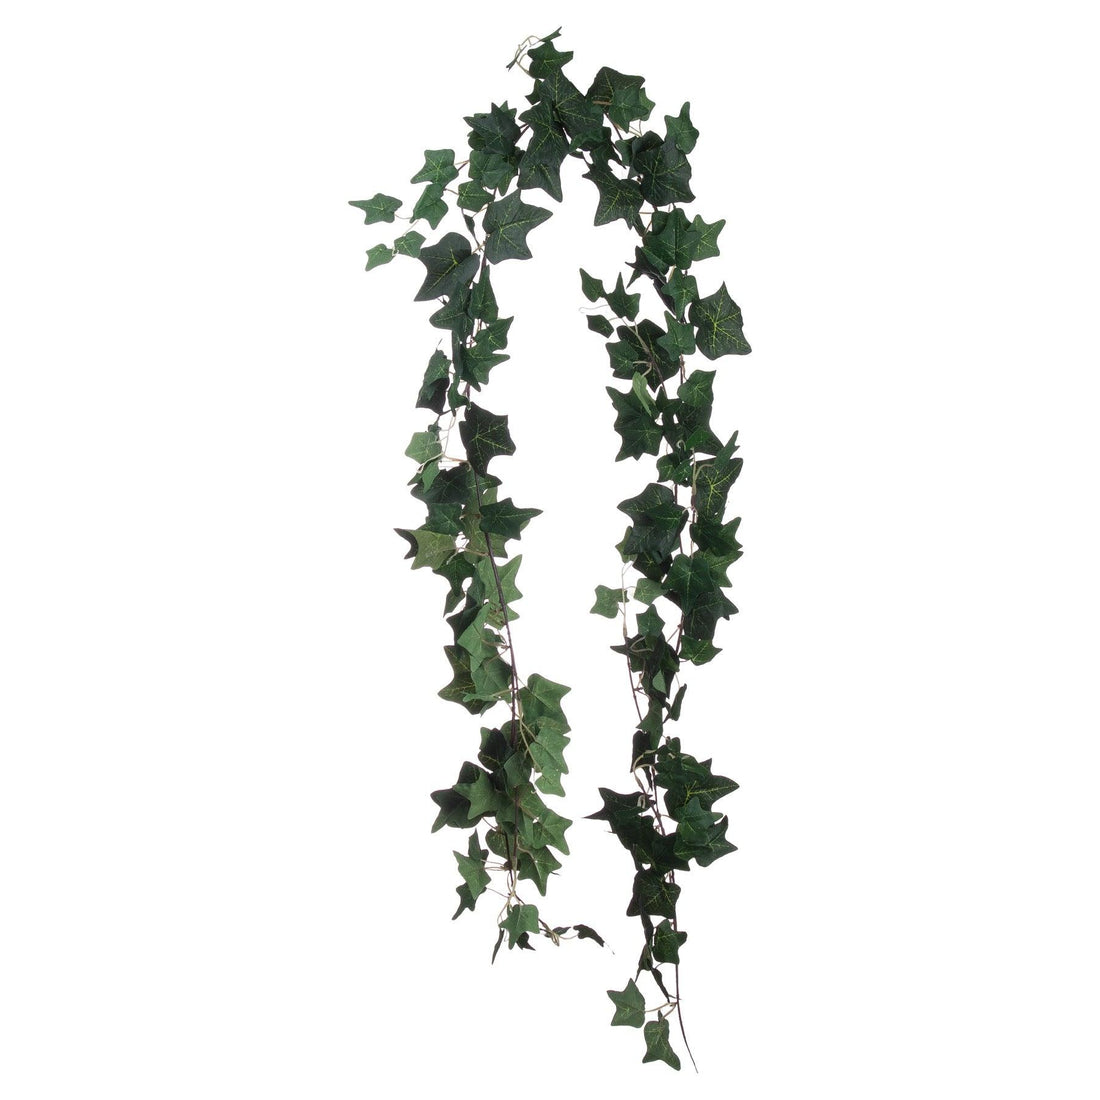 Ivy Garland - £21.95 - Gifts & Accessories > Christmas Decorations > Christmas Wreaths & Garlands 